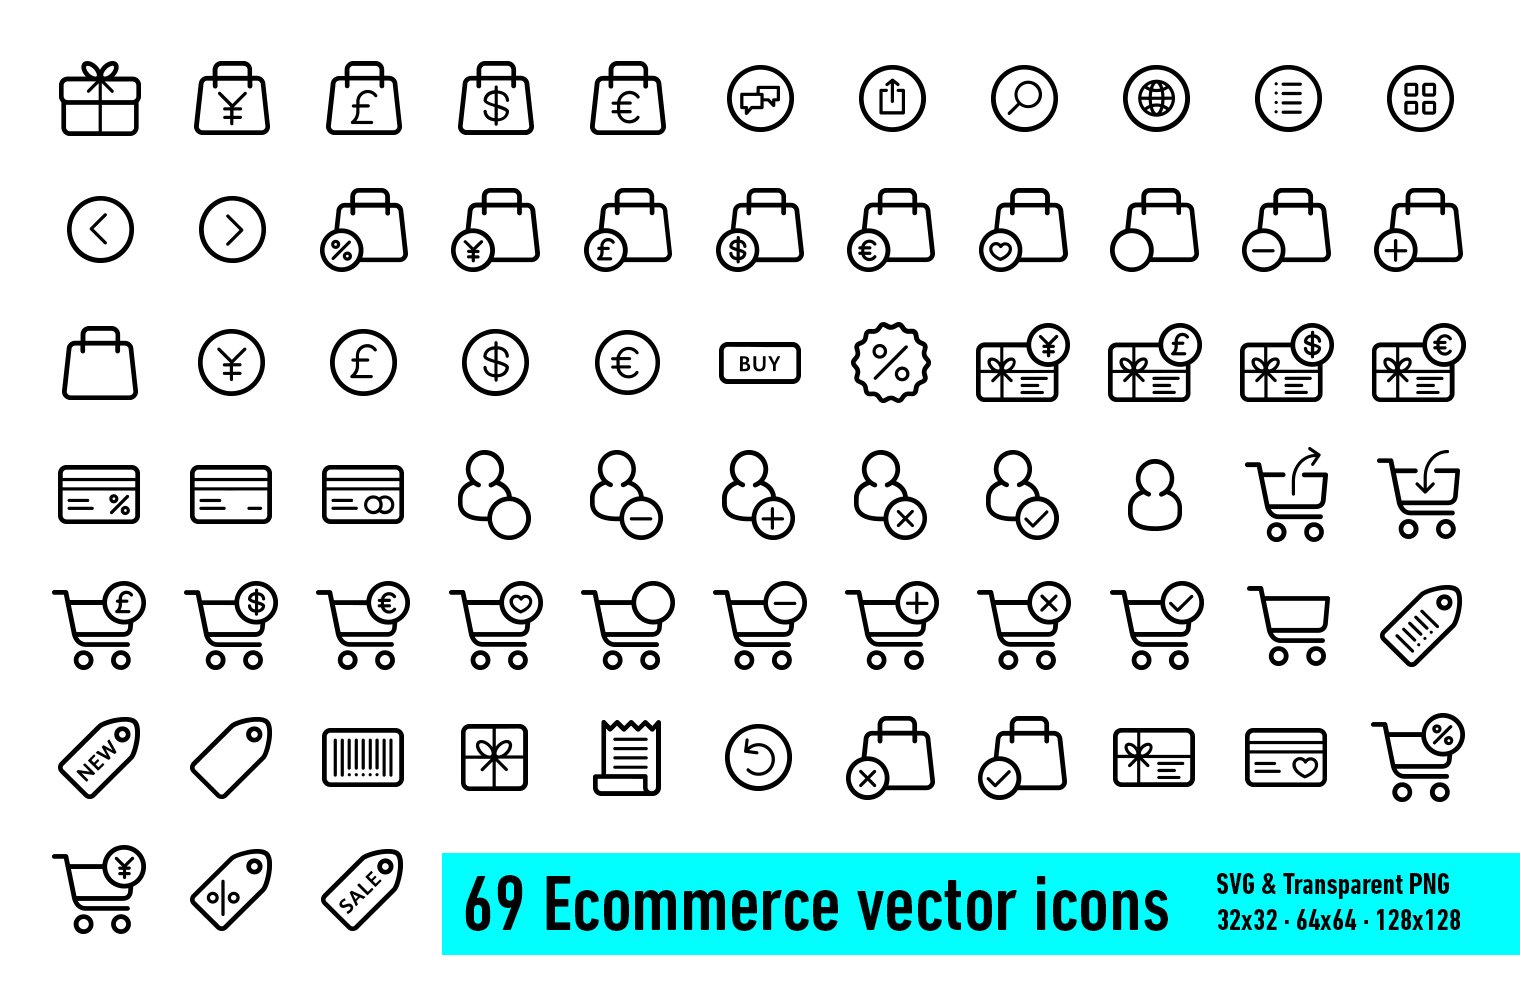 69 Ecommerce / Shopping vector icons cover image.